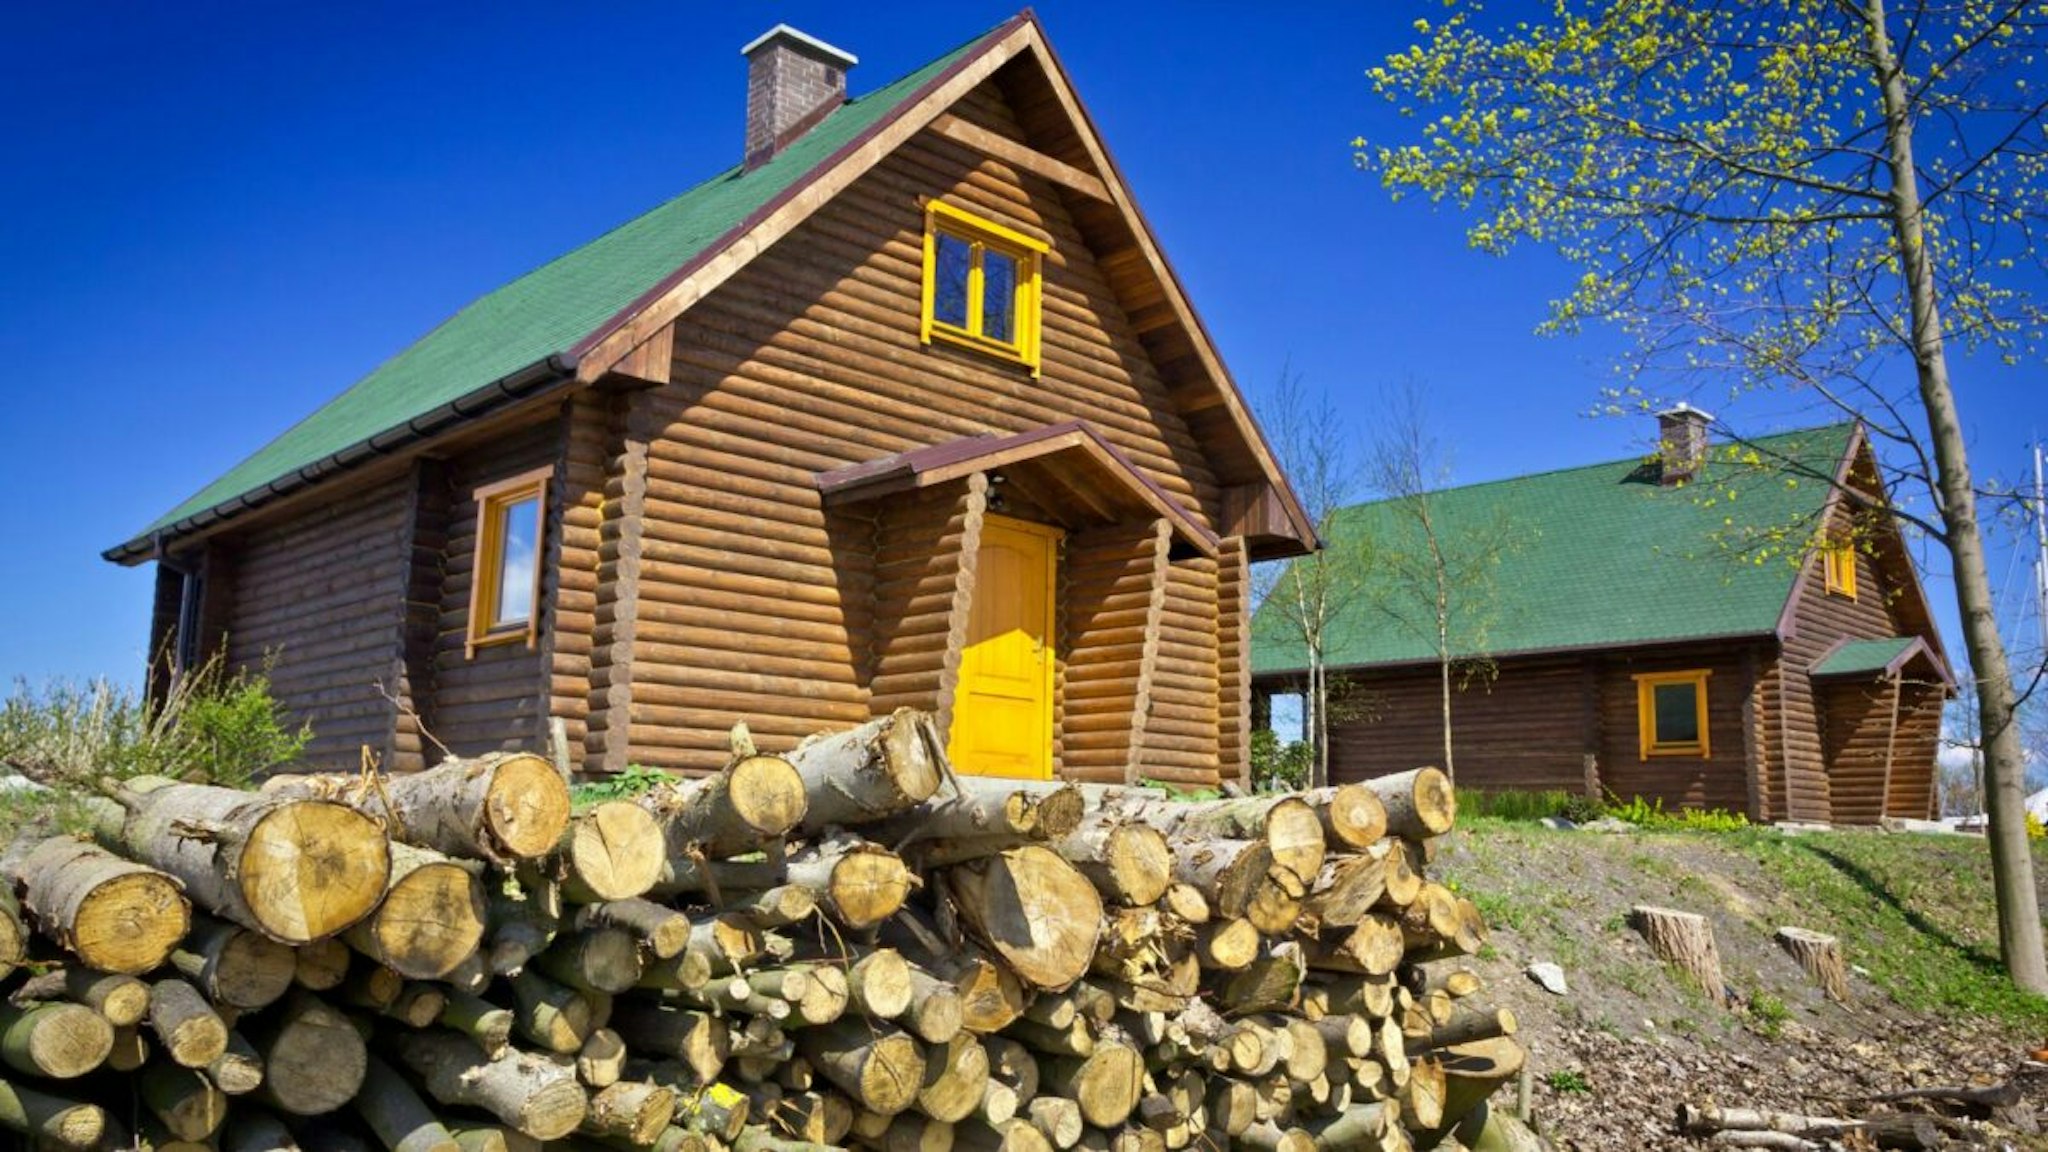 Spring view of the stacked Logs and camping cabins against blue sky